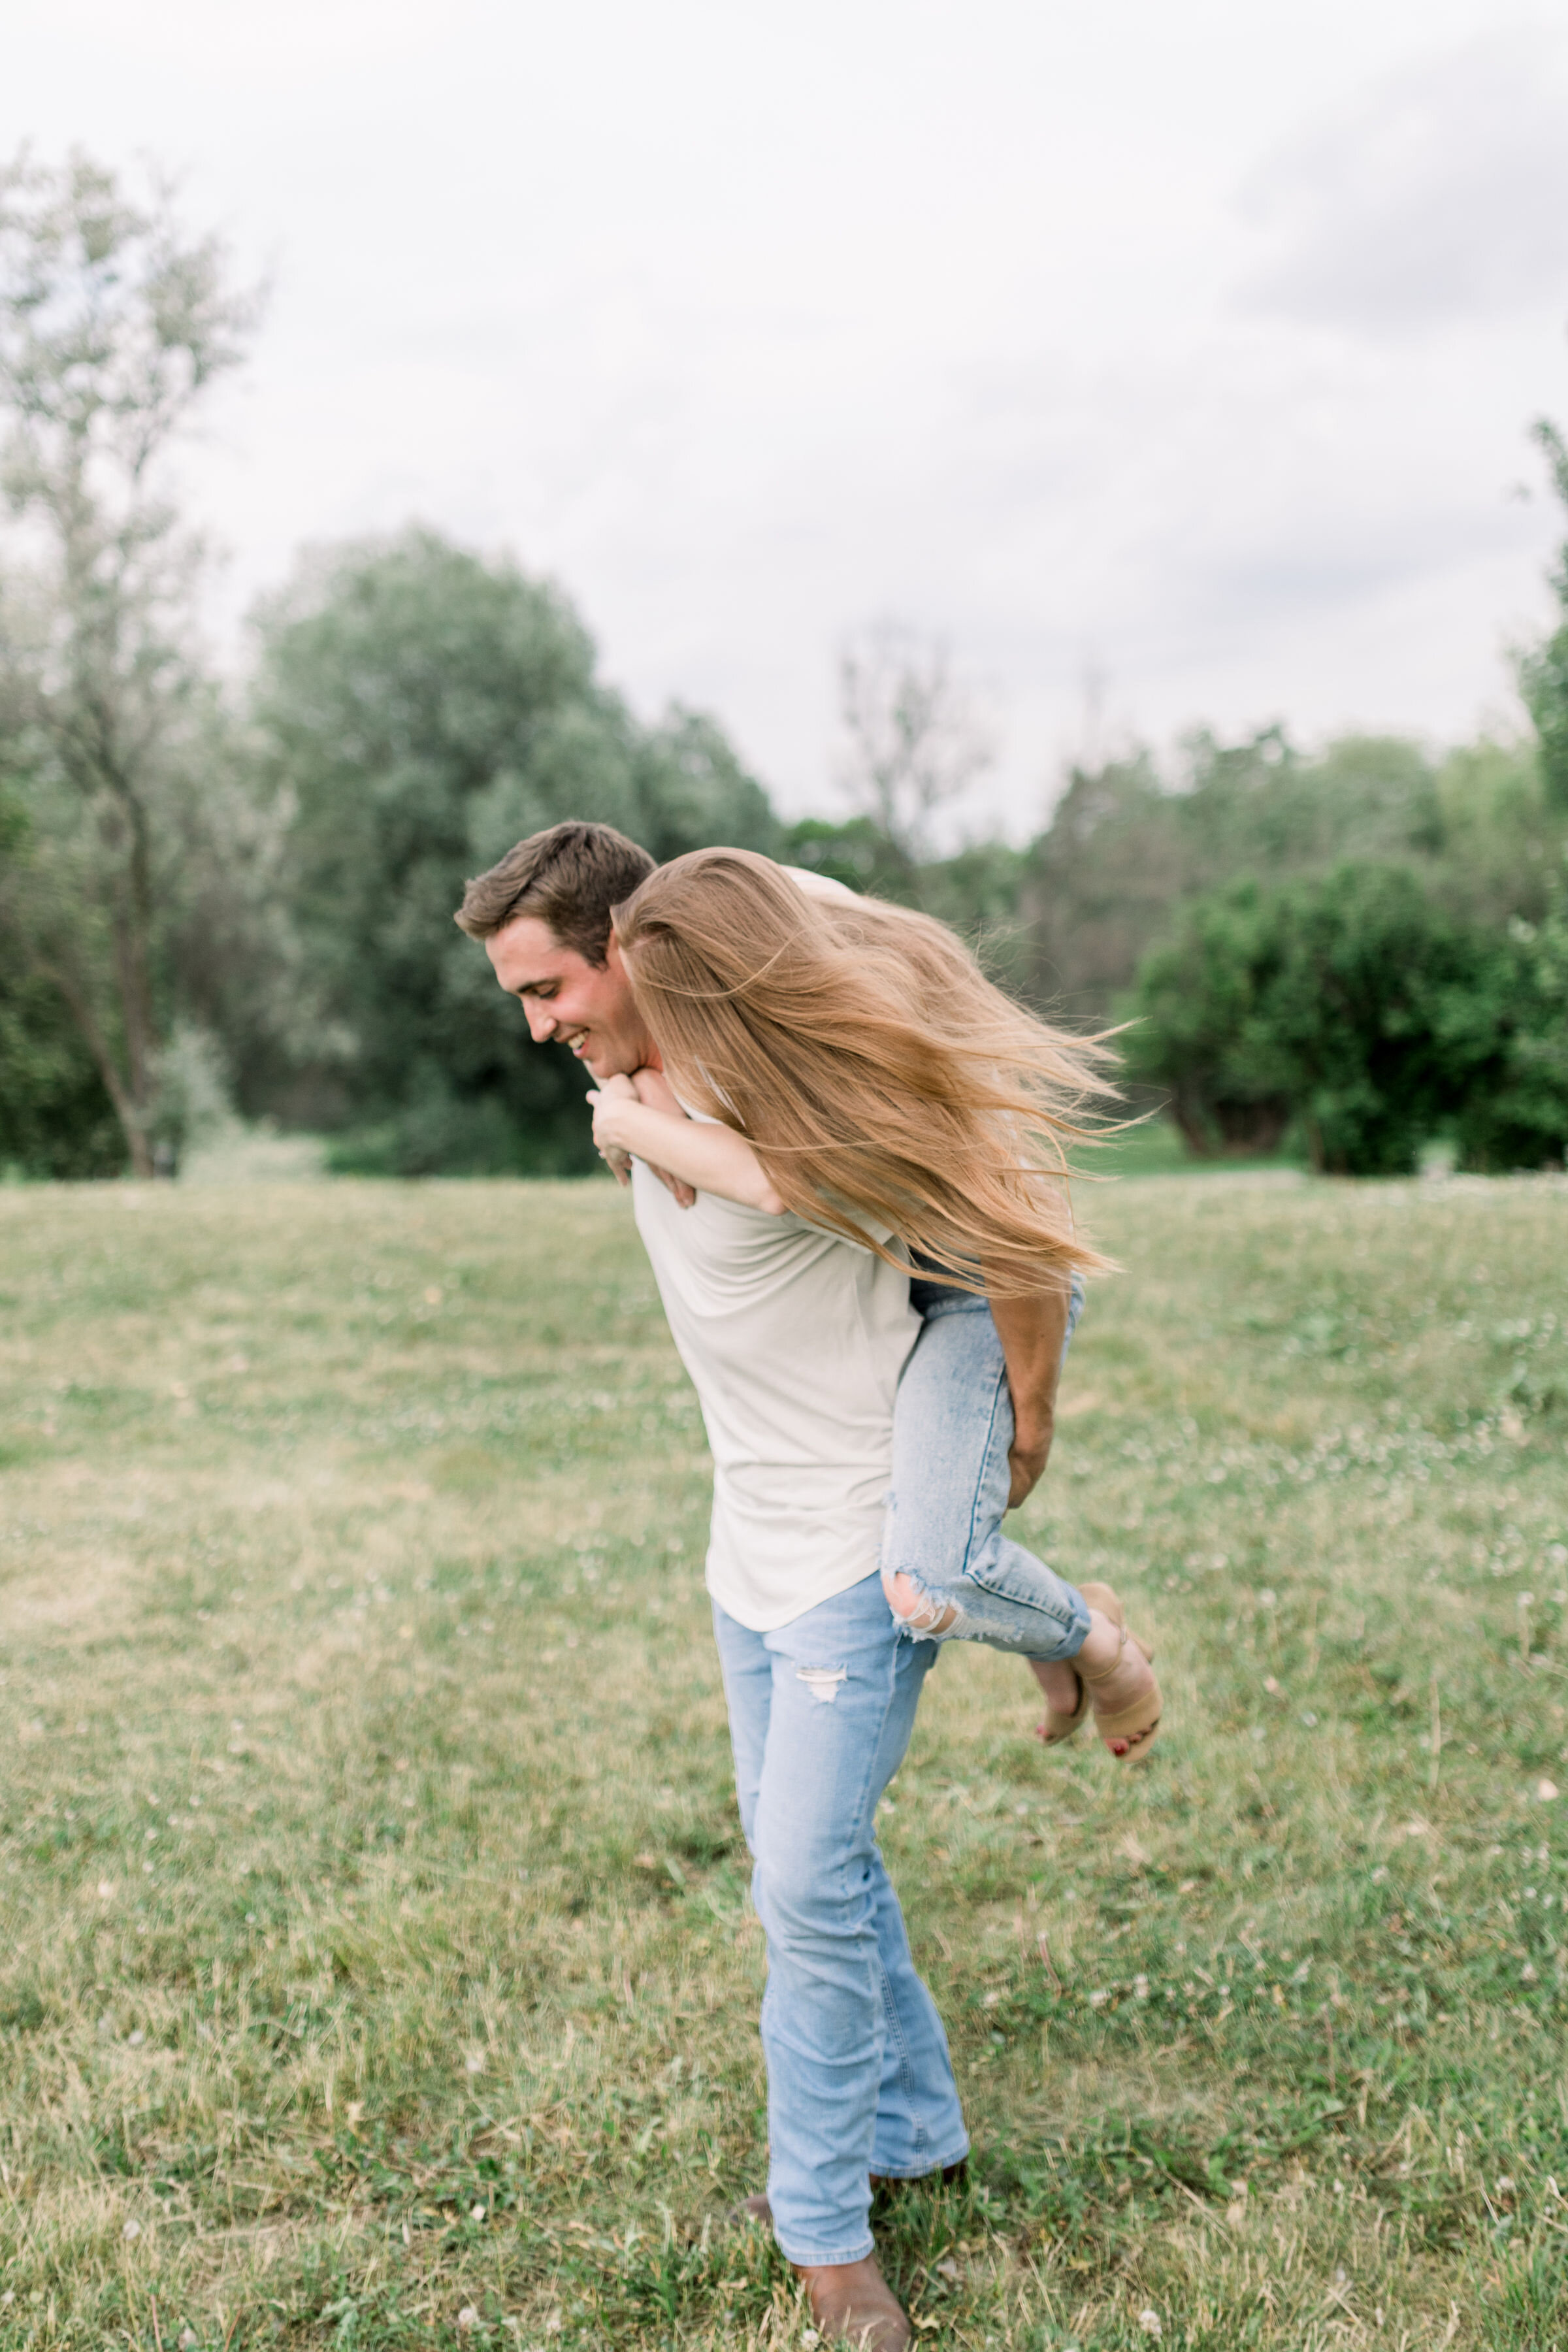  Ottawa, Ontario engagement photographer, Chelsea Mason Photography captures this woman riding her fiancé's back for a piggy back ride and kisses his cheek. woman kissing groom's cheek couple piggy back ride Ottawa engagement photographer #ChelseaMas